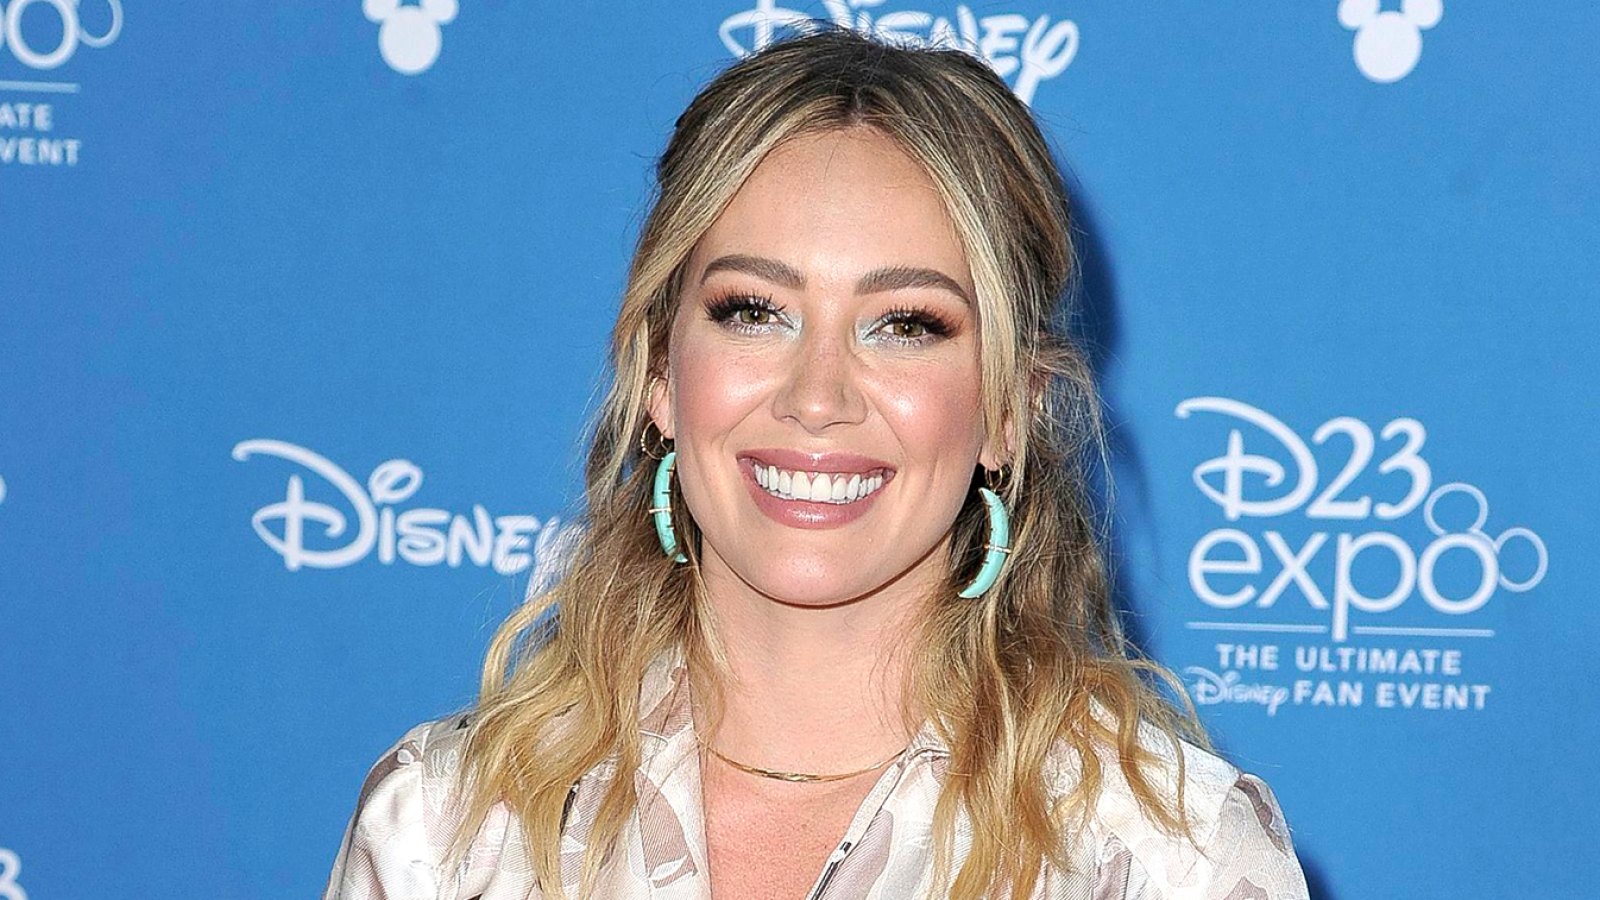 Hilary Duff ‘Accidentally’ Turns Her Blonde Hair Green After Shampoo Mix Up